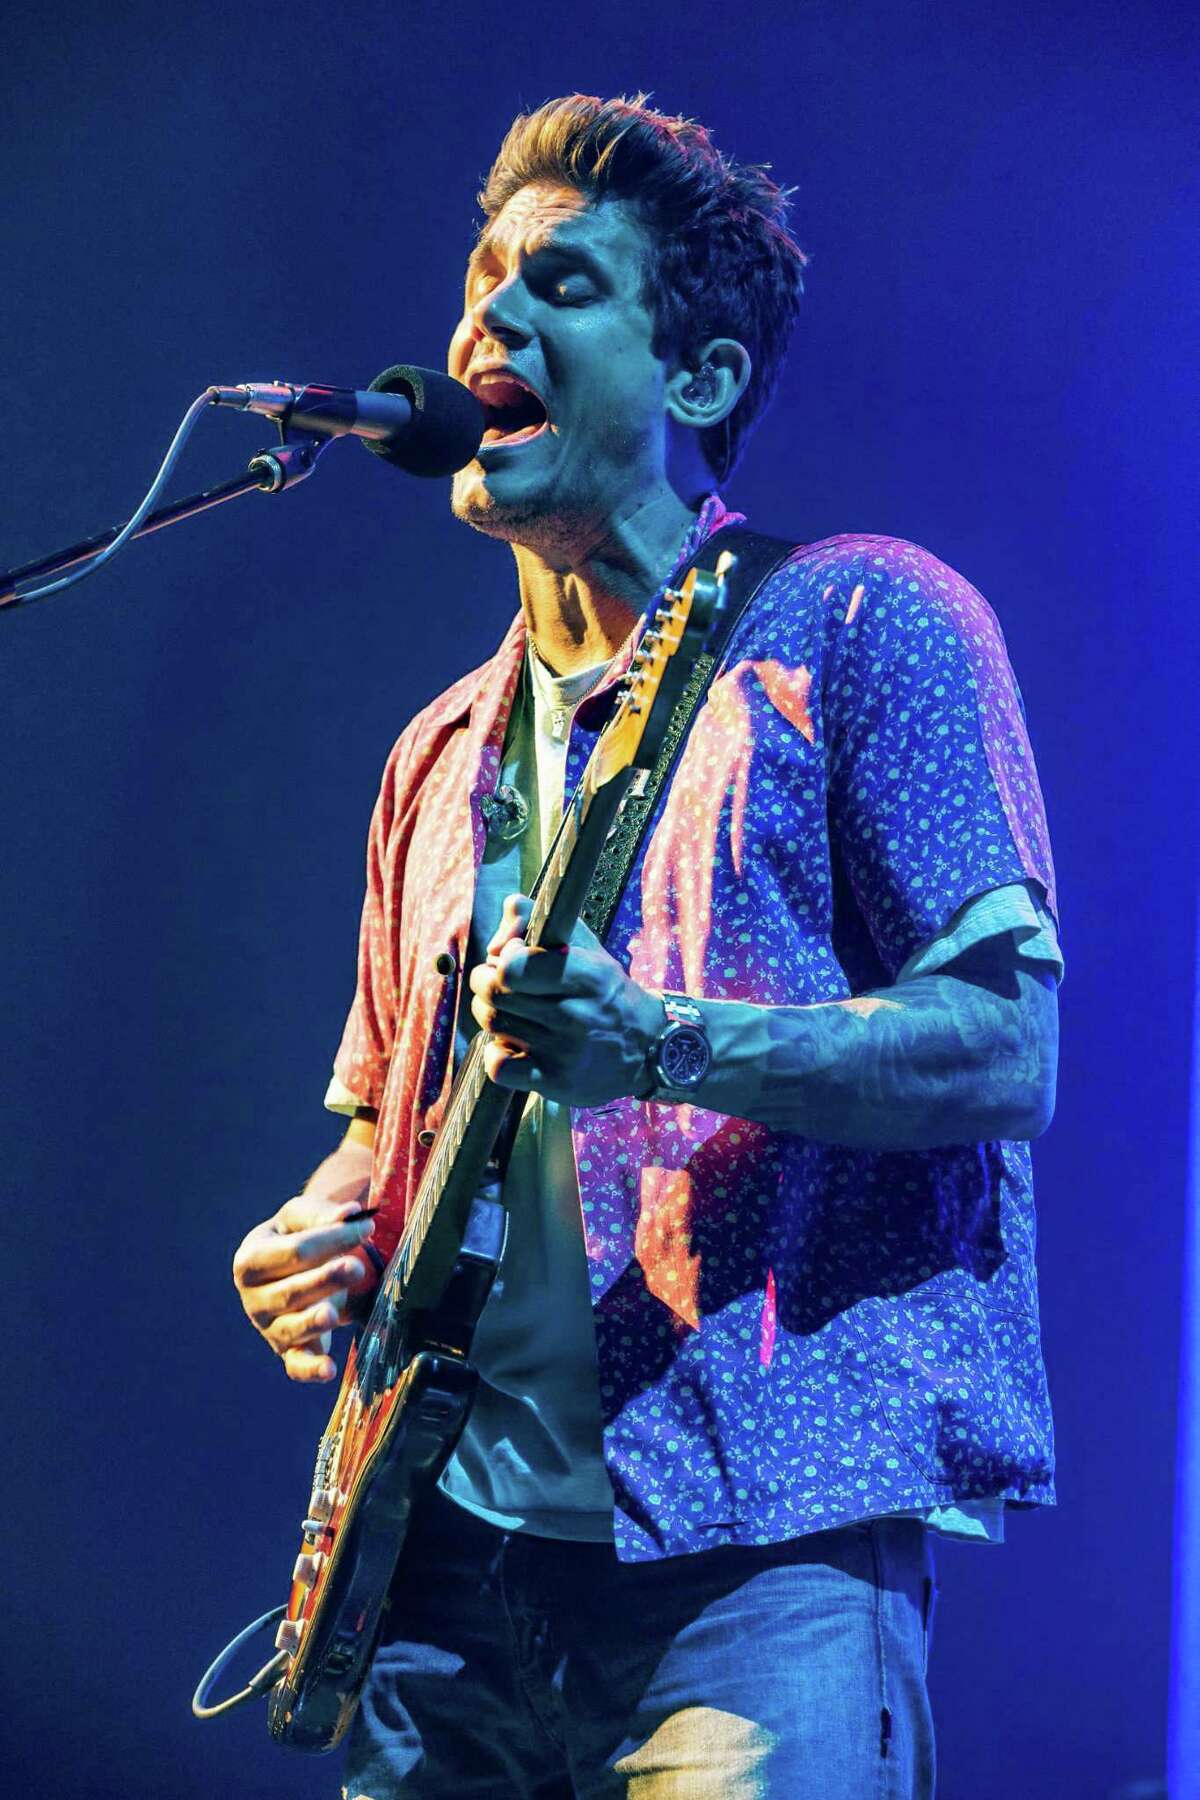 Bridgeport native John Mayer performs last month on his “The Search for Everything World Tour” at the AT&T Center in San Antonio.